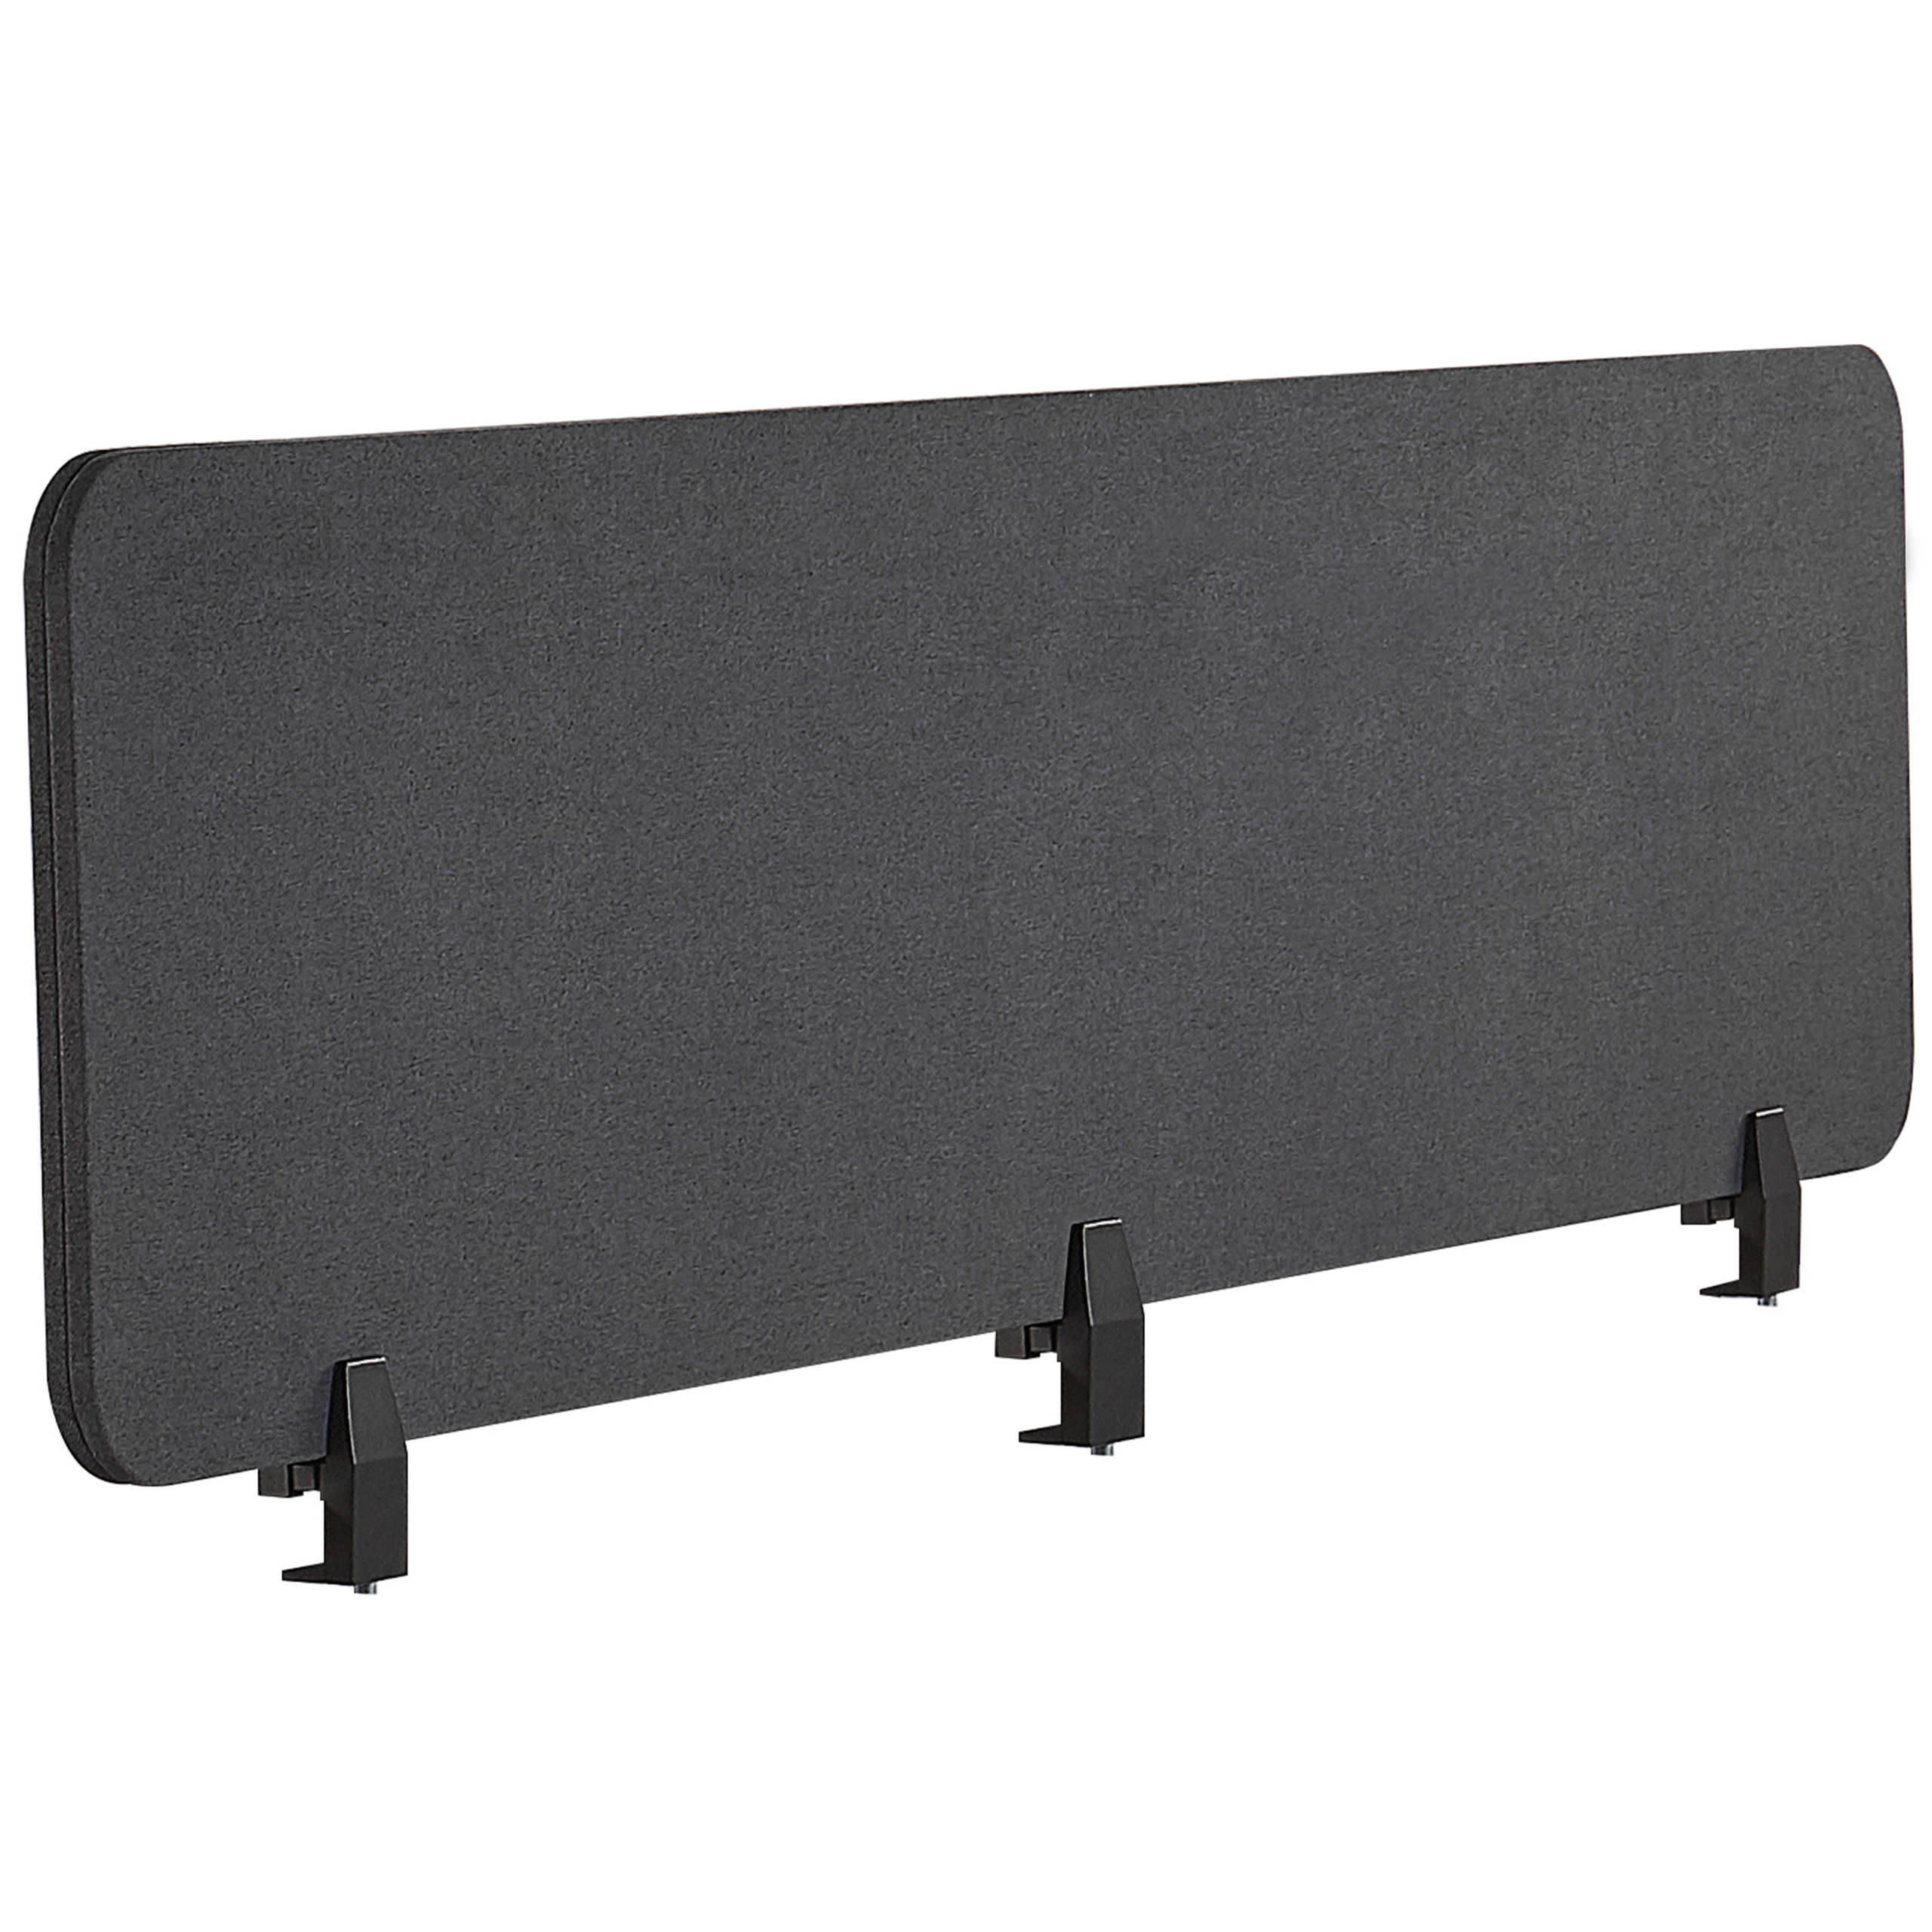 Beliani Desk Screen Dark Grey PET Board Fabric Cover 180 x 40 cm Acoustic Screen Modular Mounting Clamps Home Office Material:Polyester Size:2x40x180